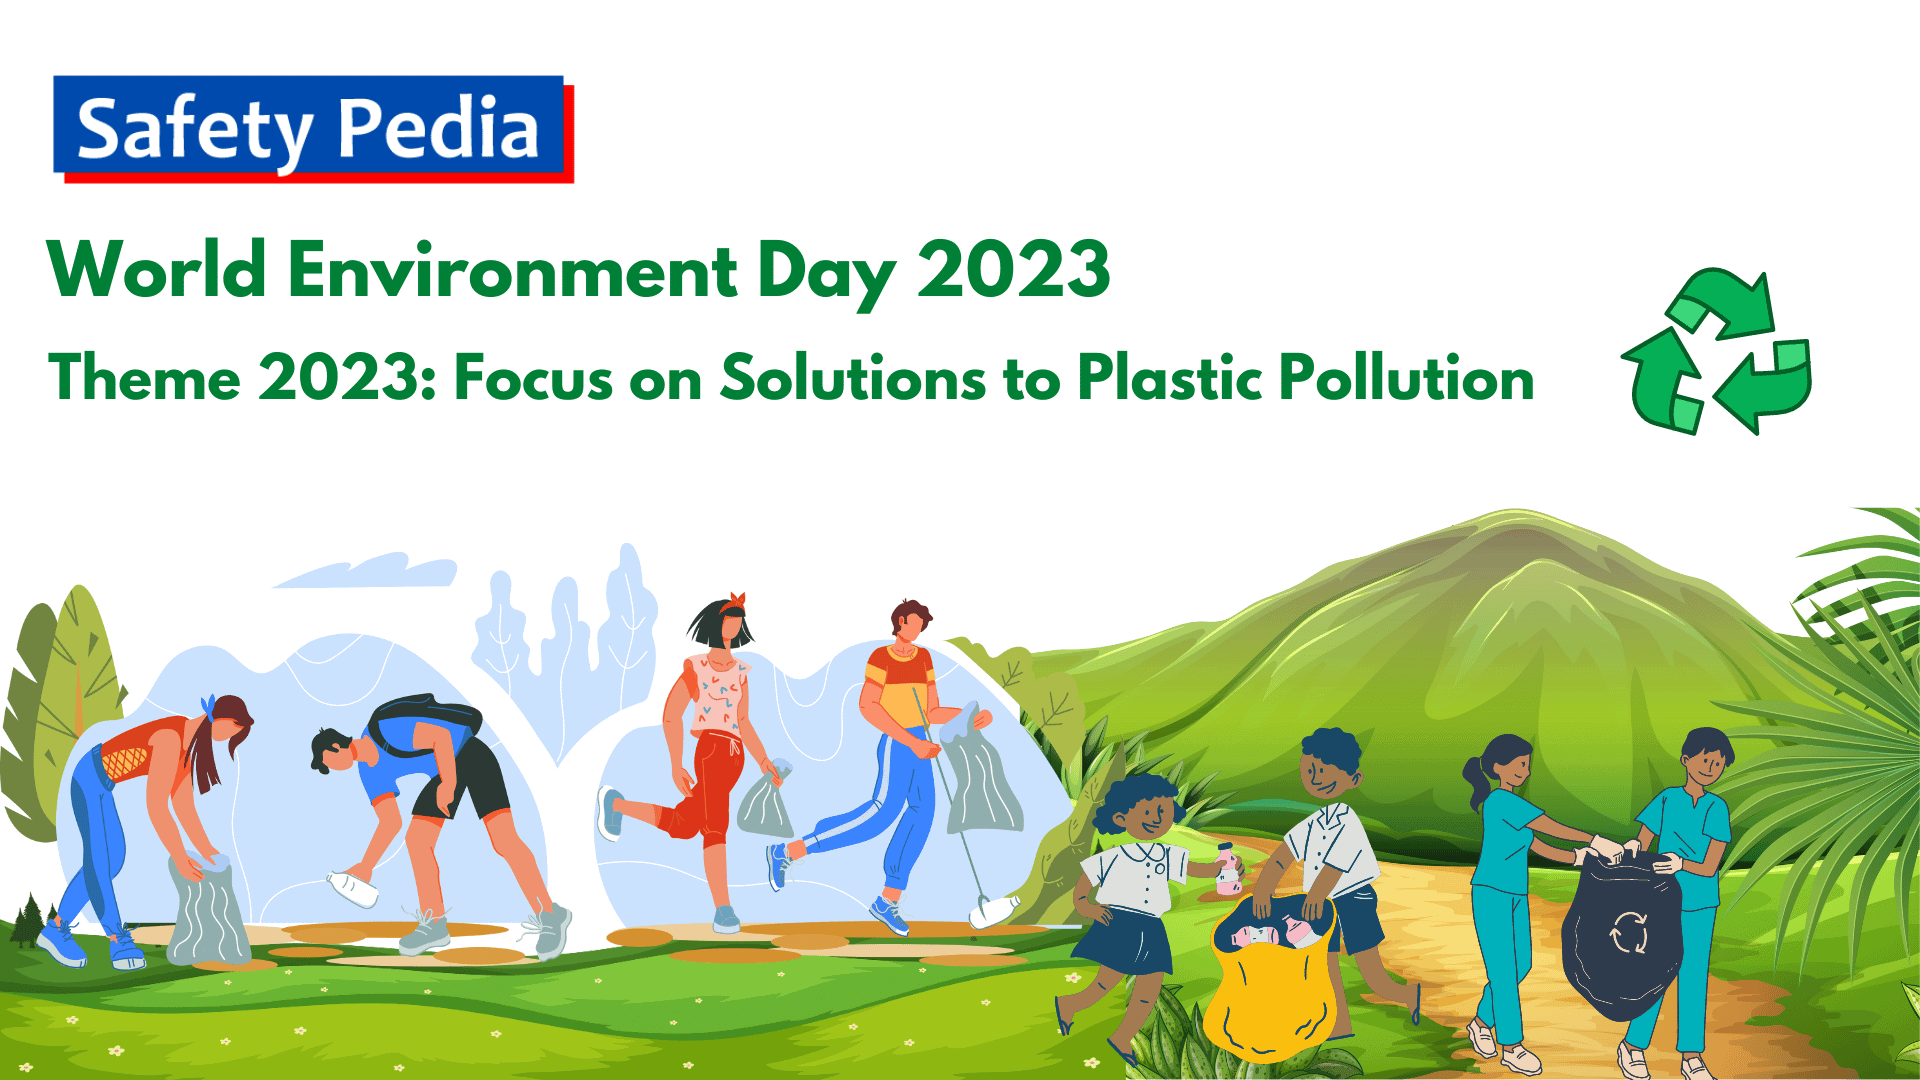 WORLD ENVIRONMENT DAY 2023: Theme 2023 Focus on Solutions to Plastic Pollution